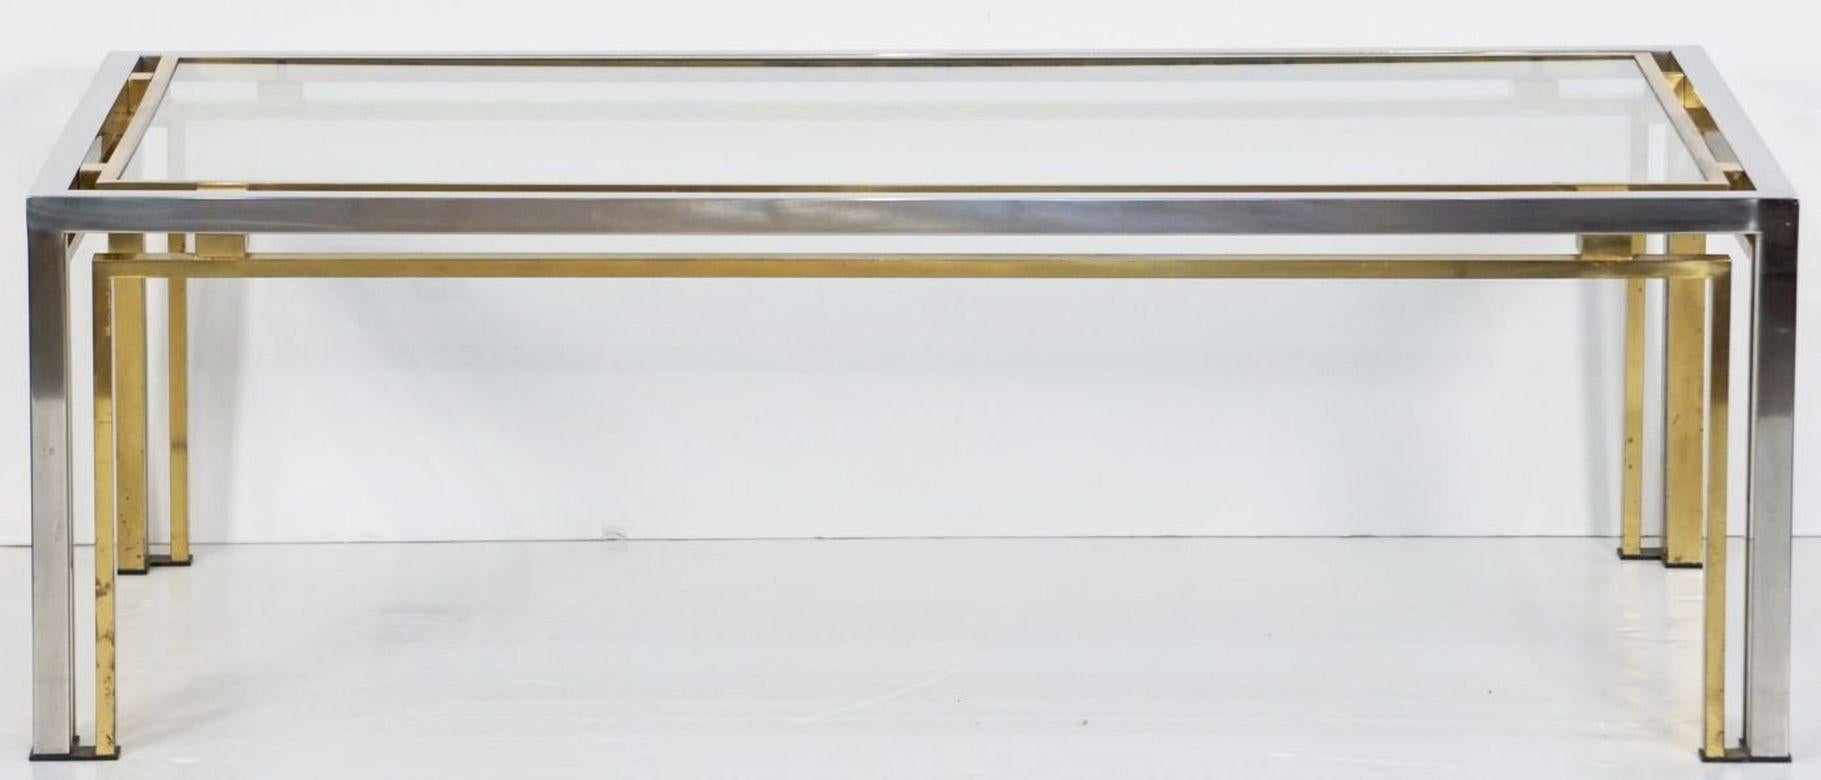 Italian Modernist Low or Coffee Table of Chrome and Brass, Attrib. Romeo Rega In Good Condition For Sale In Austin, TX